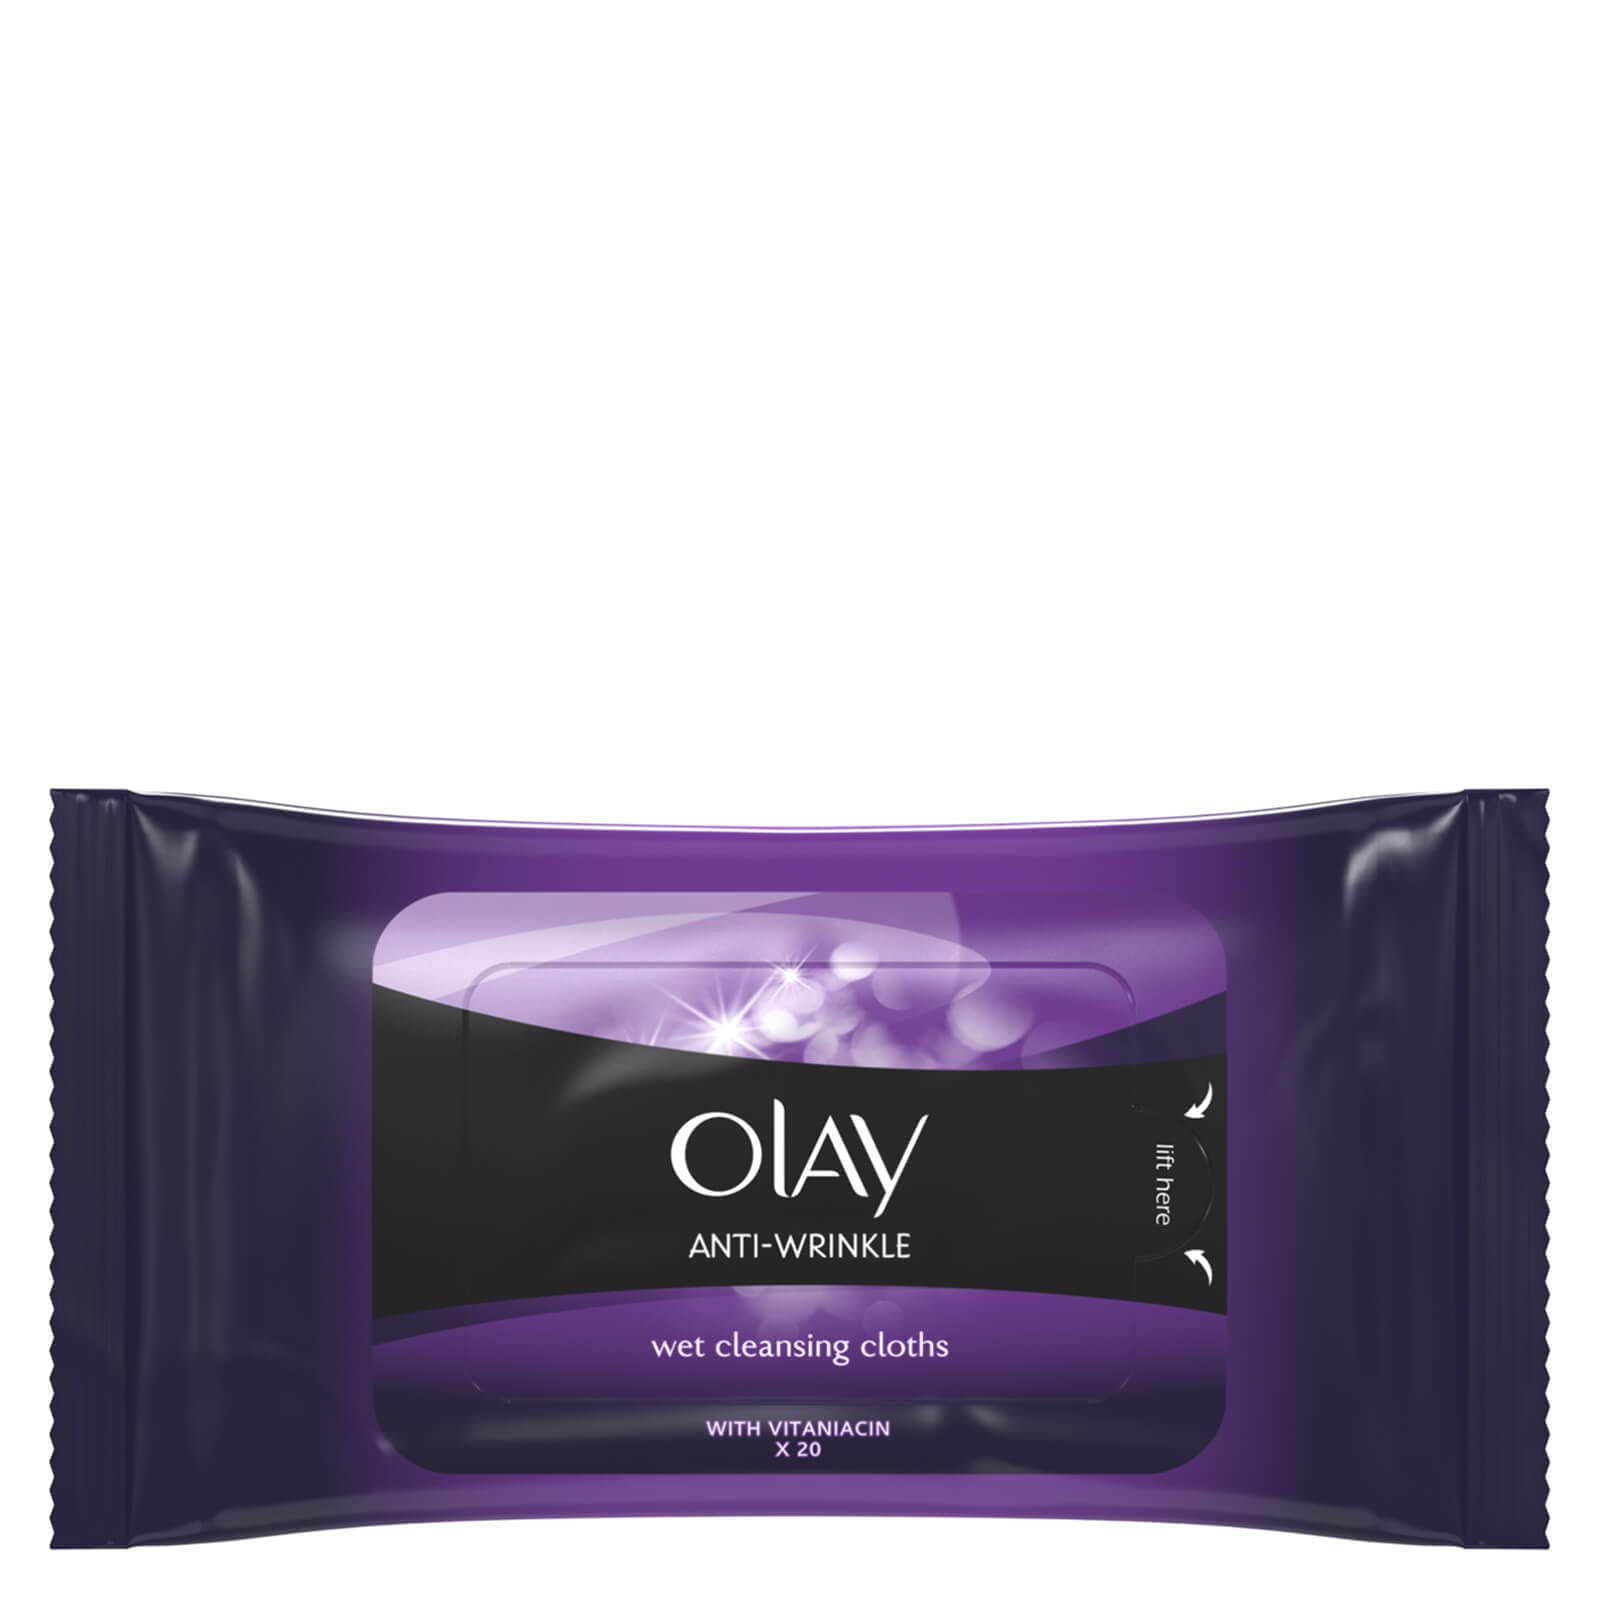 Olay Anti-Wrinkle Firm and Lift Anti-Ageing Cleansing Cloths 20 Wipes